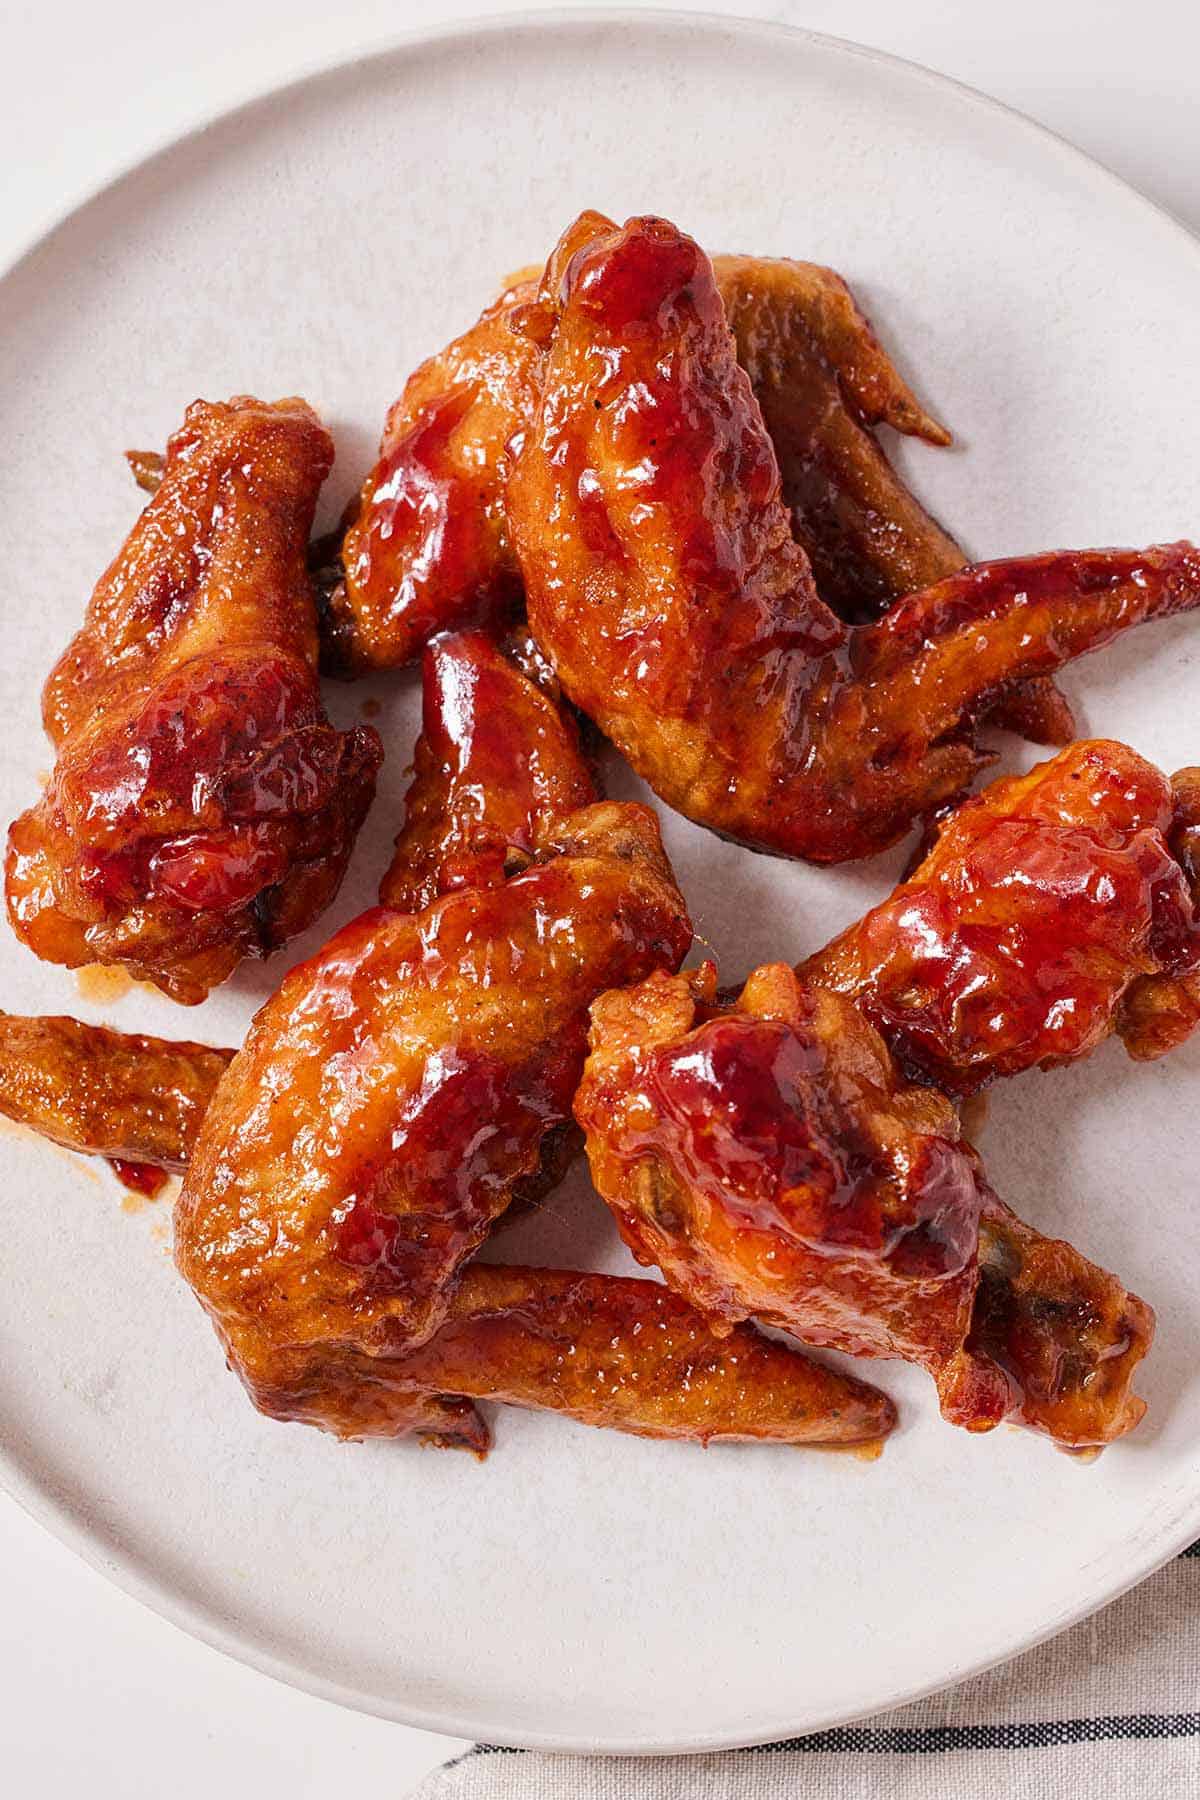 A plate with multiple honey BBQ wings on a white plate.